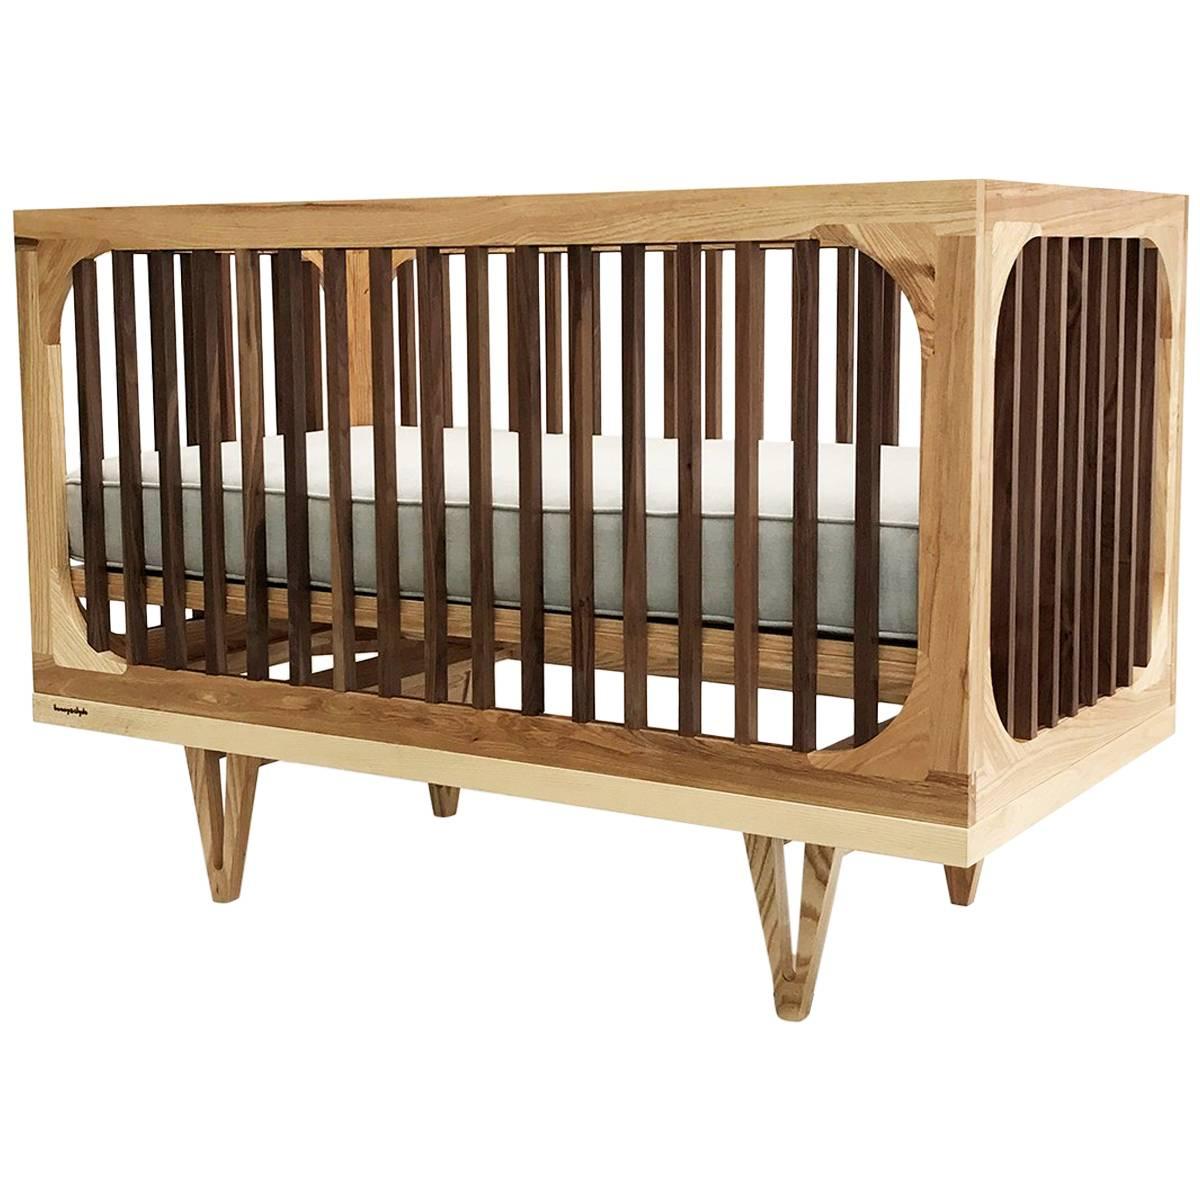 Harrison 3 in 1 Crib, Toddler Bed and Daybed Heirloom Nursery Furniture Set For Sale